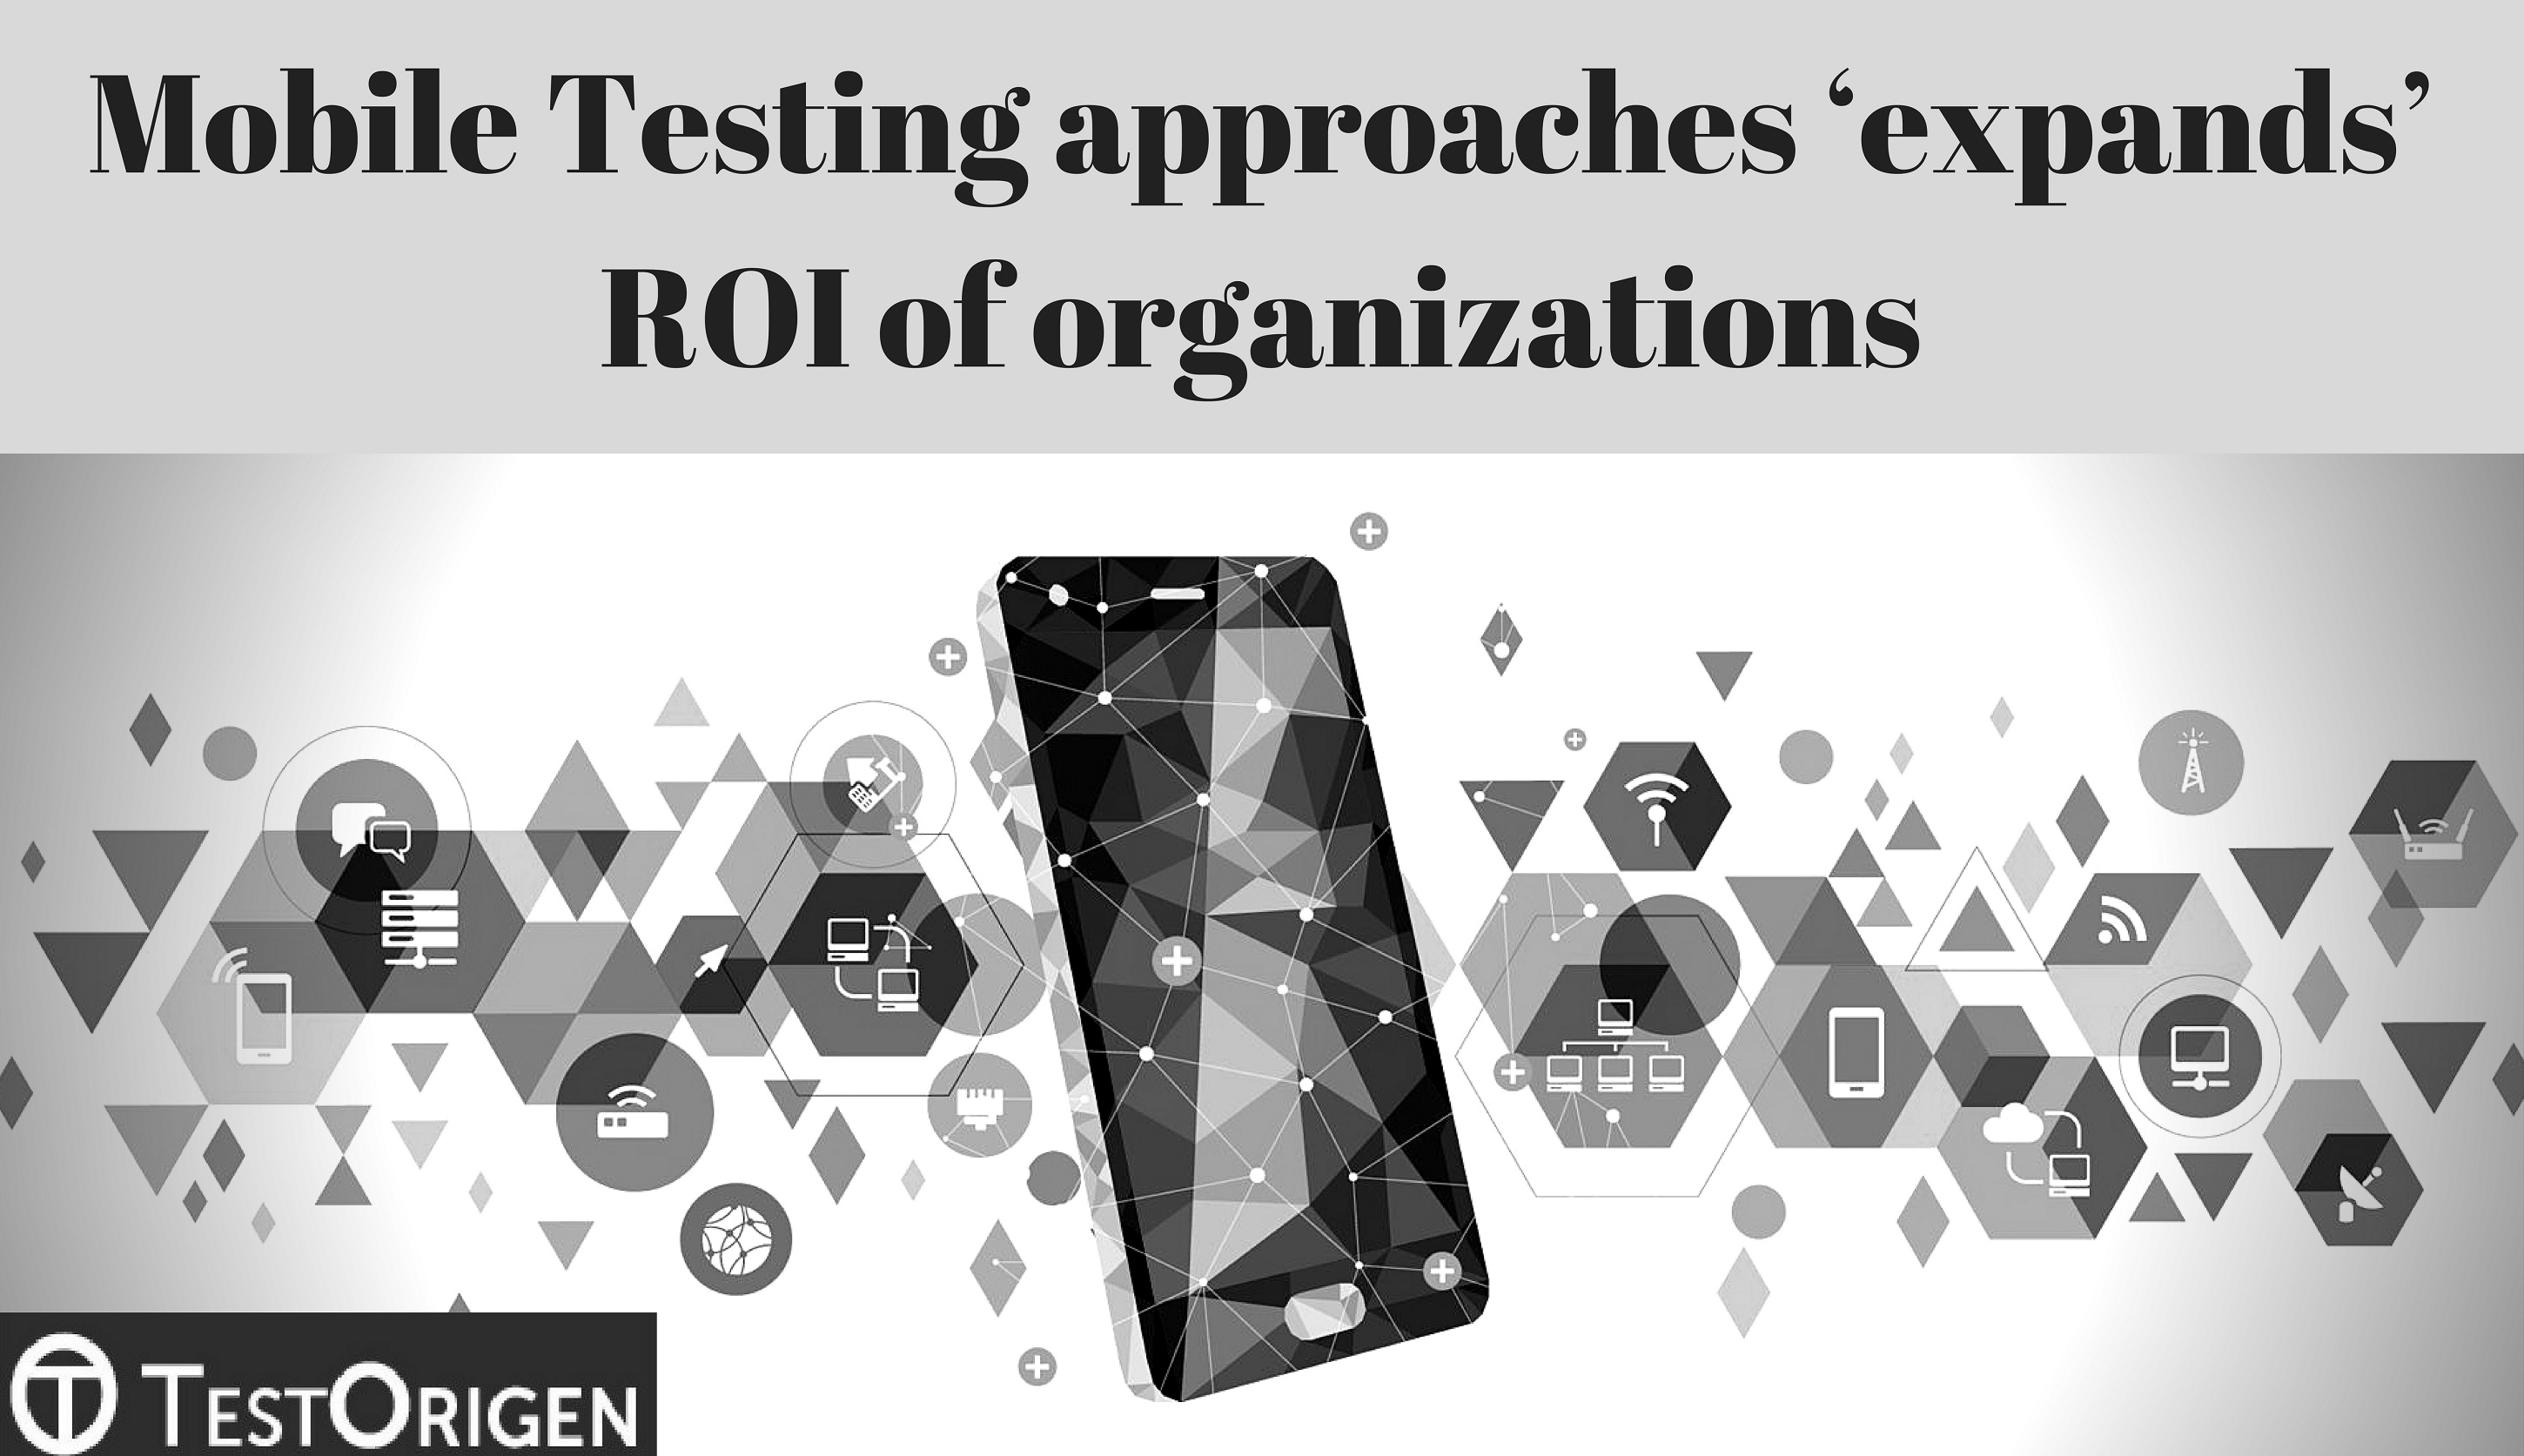 Mobile Testing approaches ‘expands’ ROI of organizations